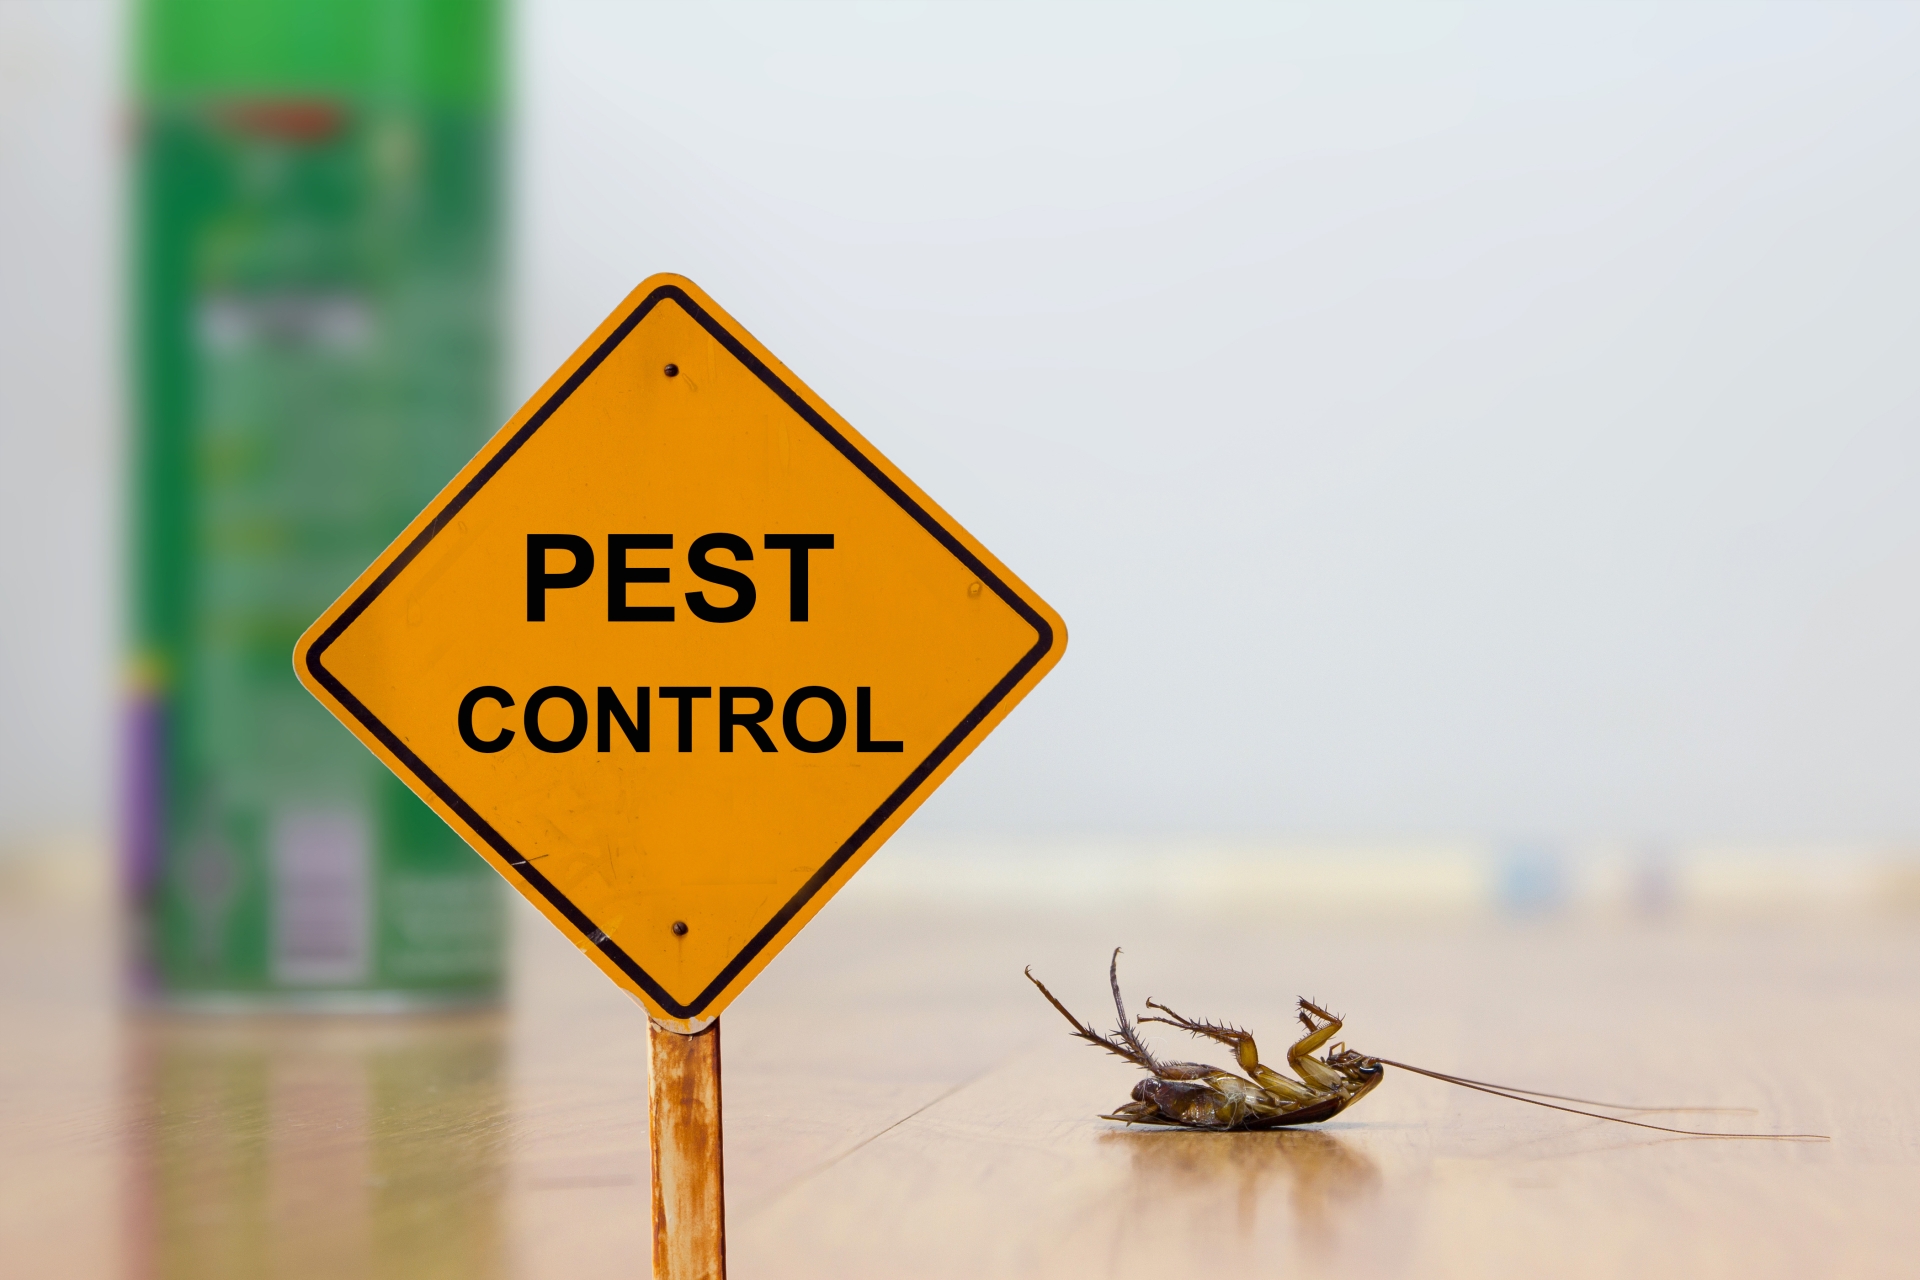 24 Hour Pest Control, Pest Control in Maida Vale, Warwick Avenue, W9. Call Now 020 8166 9746